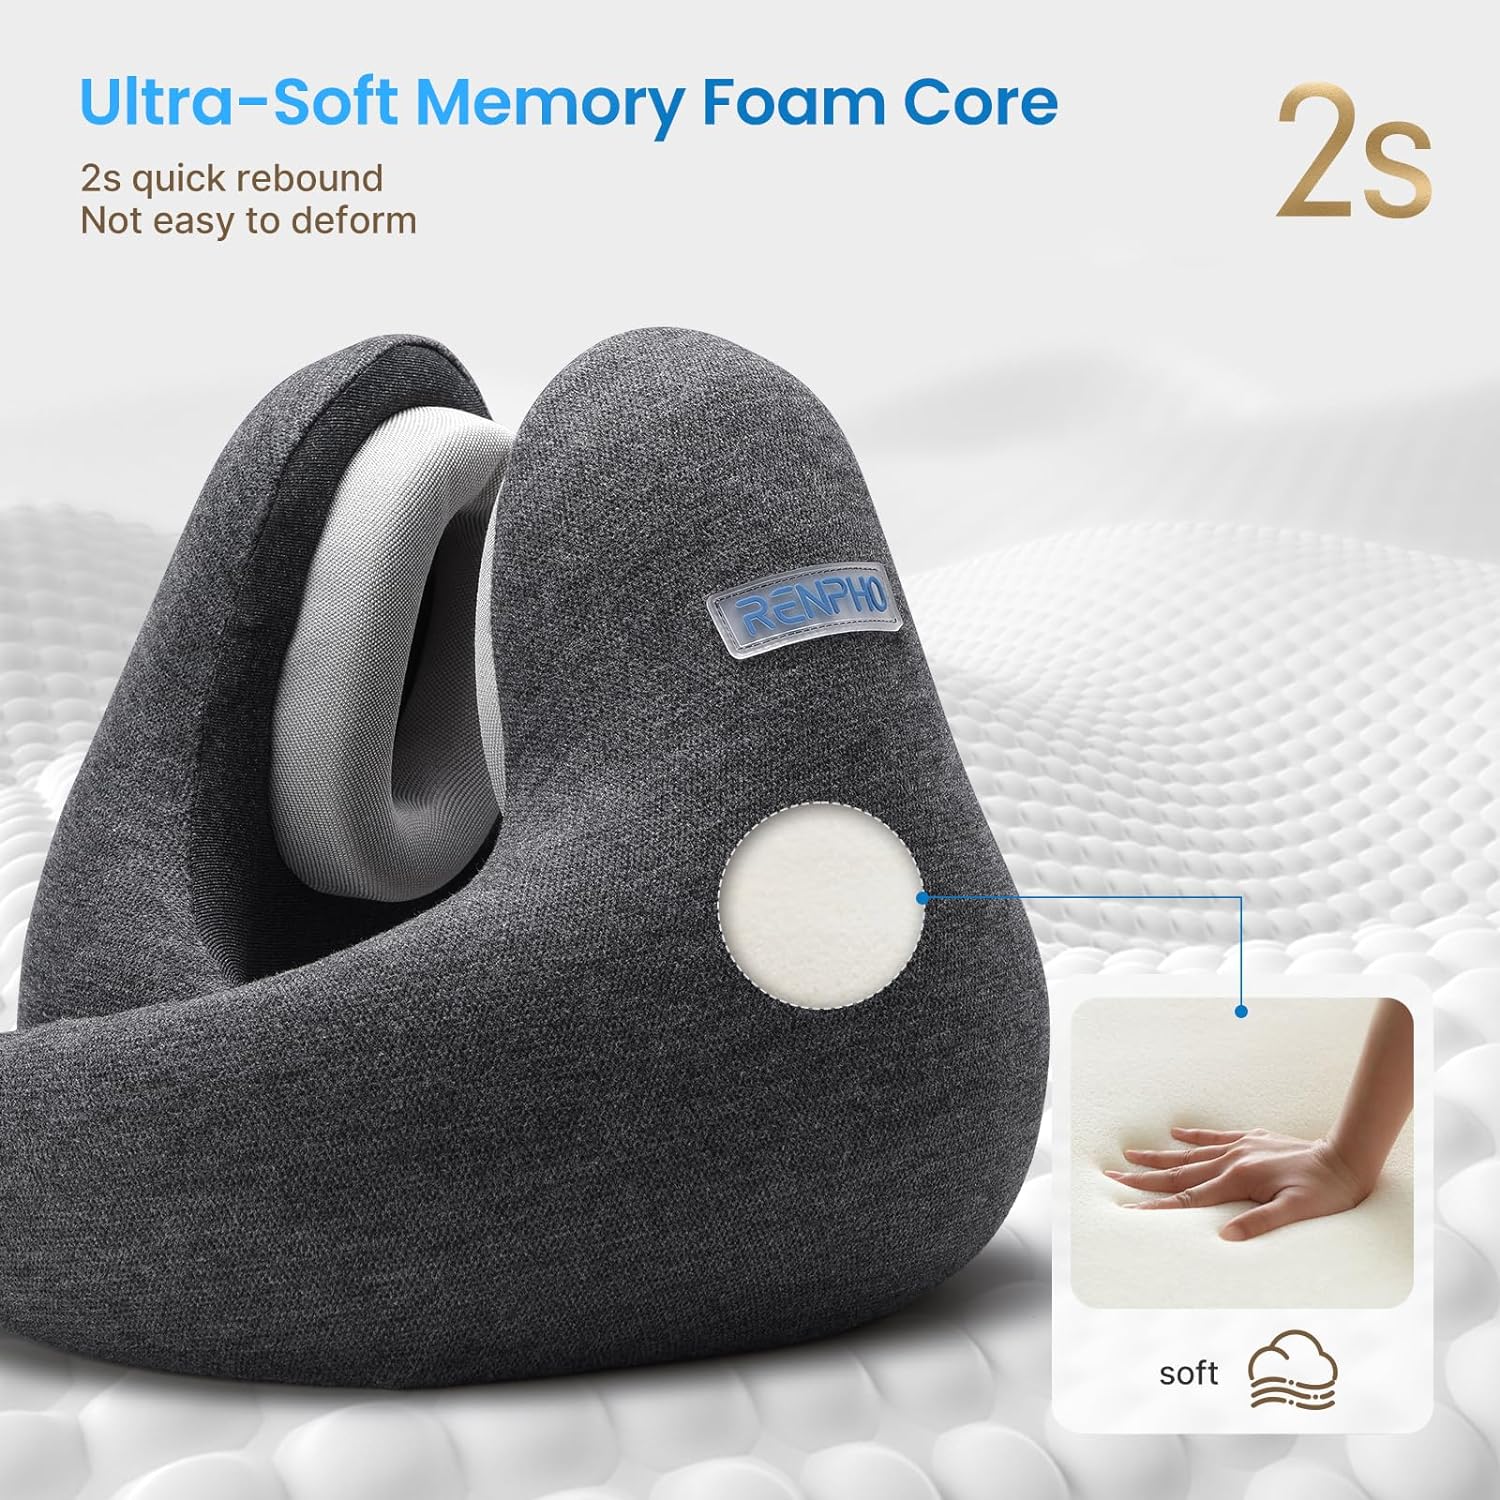 An ergonomic, dark gray RENPHO memory foam neck support pillow prominently displayed against a light gray background, with labels indicating a "2s quick rebound" feature and softness emphasized by a graphic of a hand pressing.